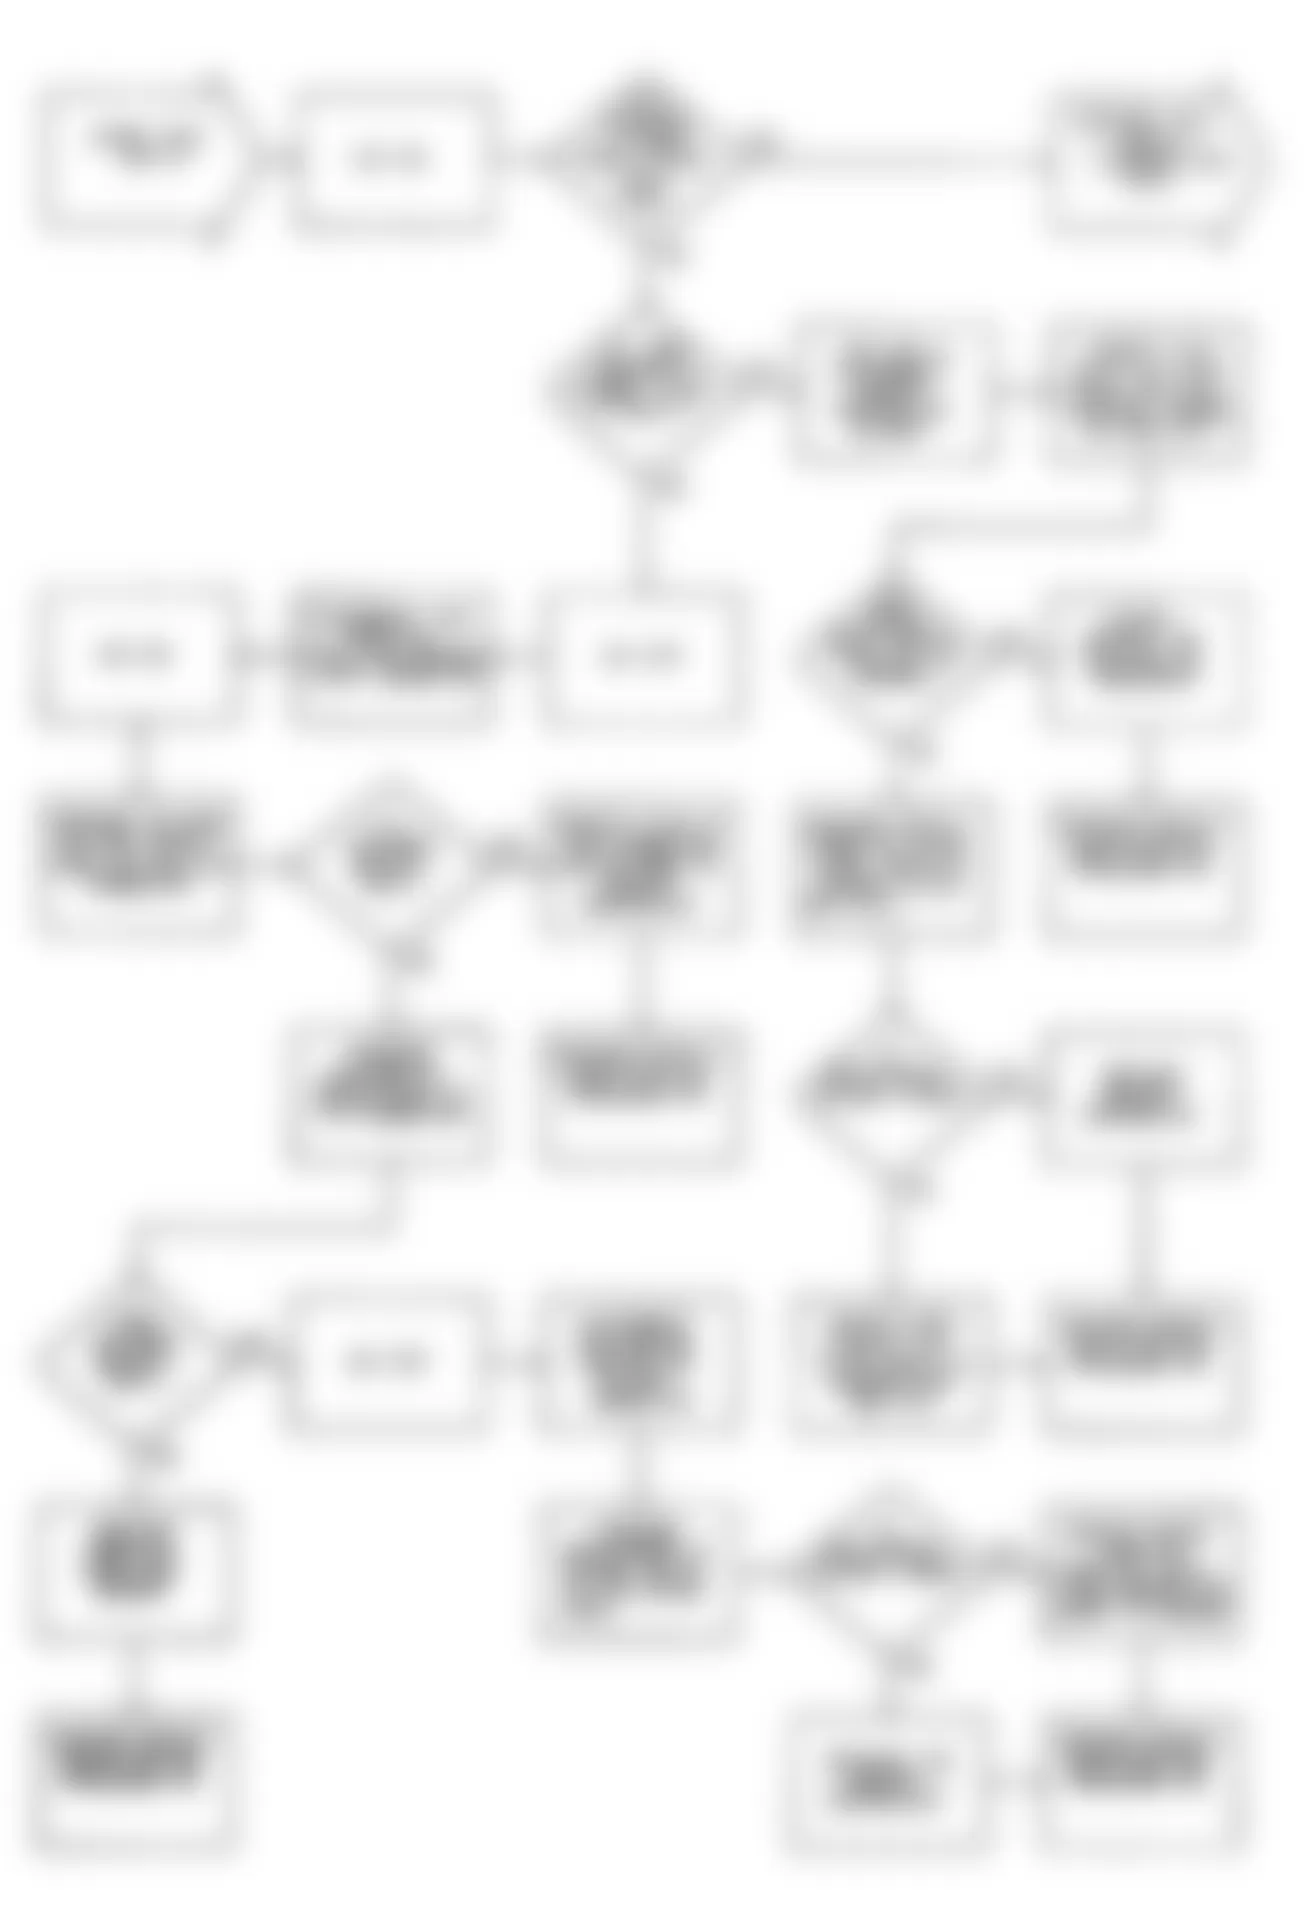 Dodge Daytona Shelby 1990 - Component Locations -  DR-13: Flow Chart